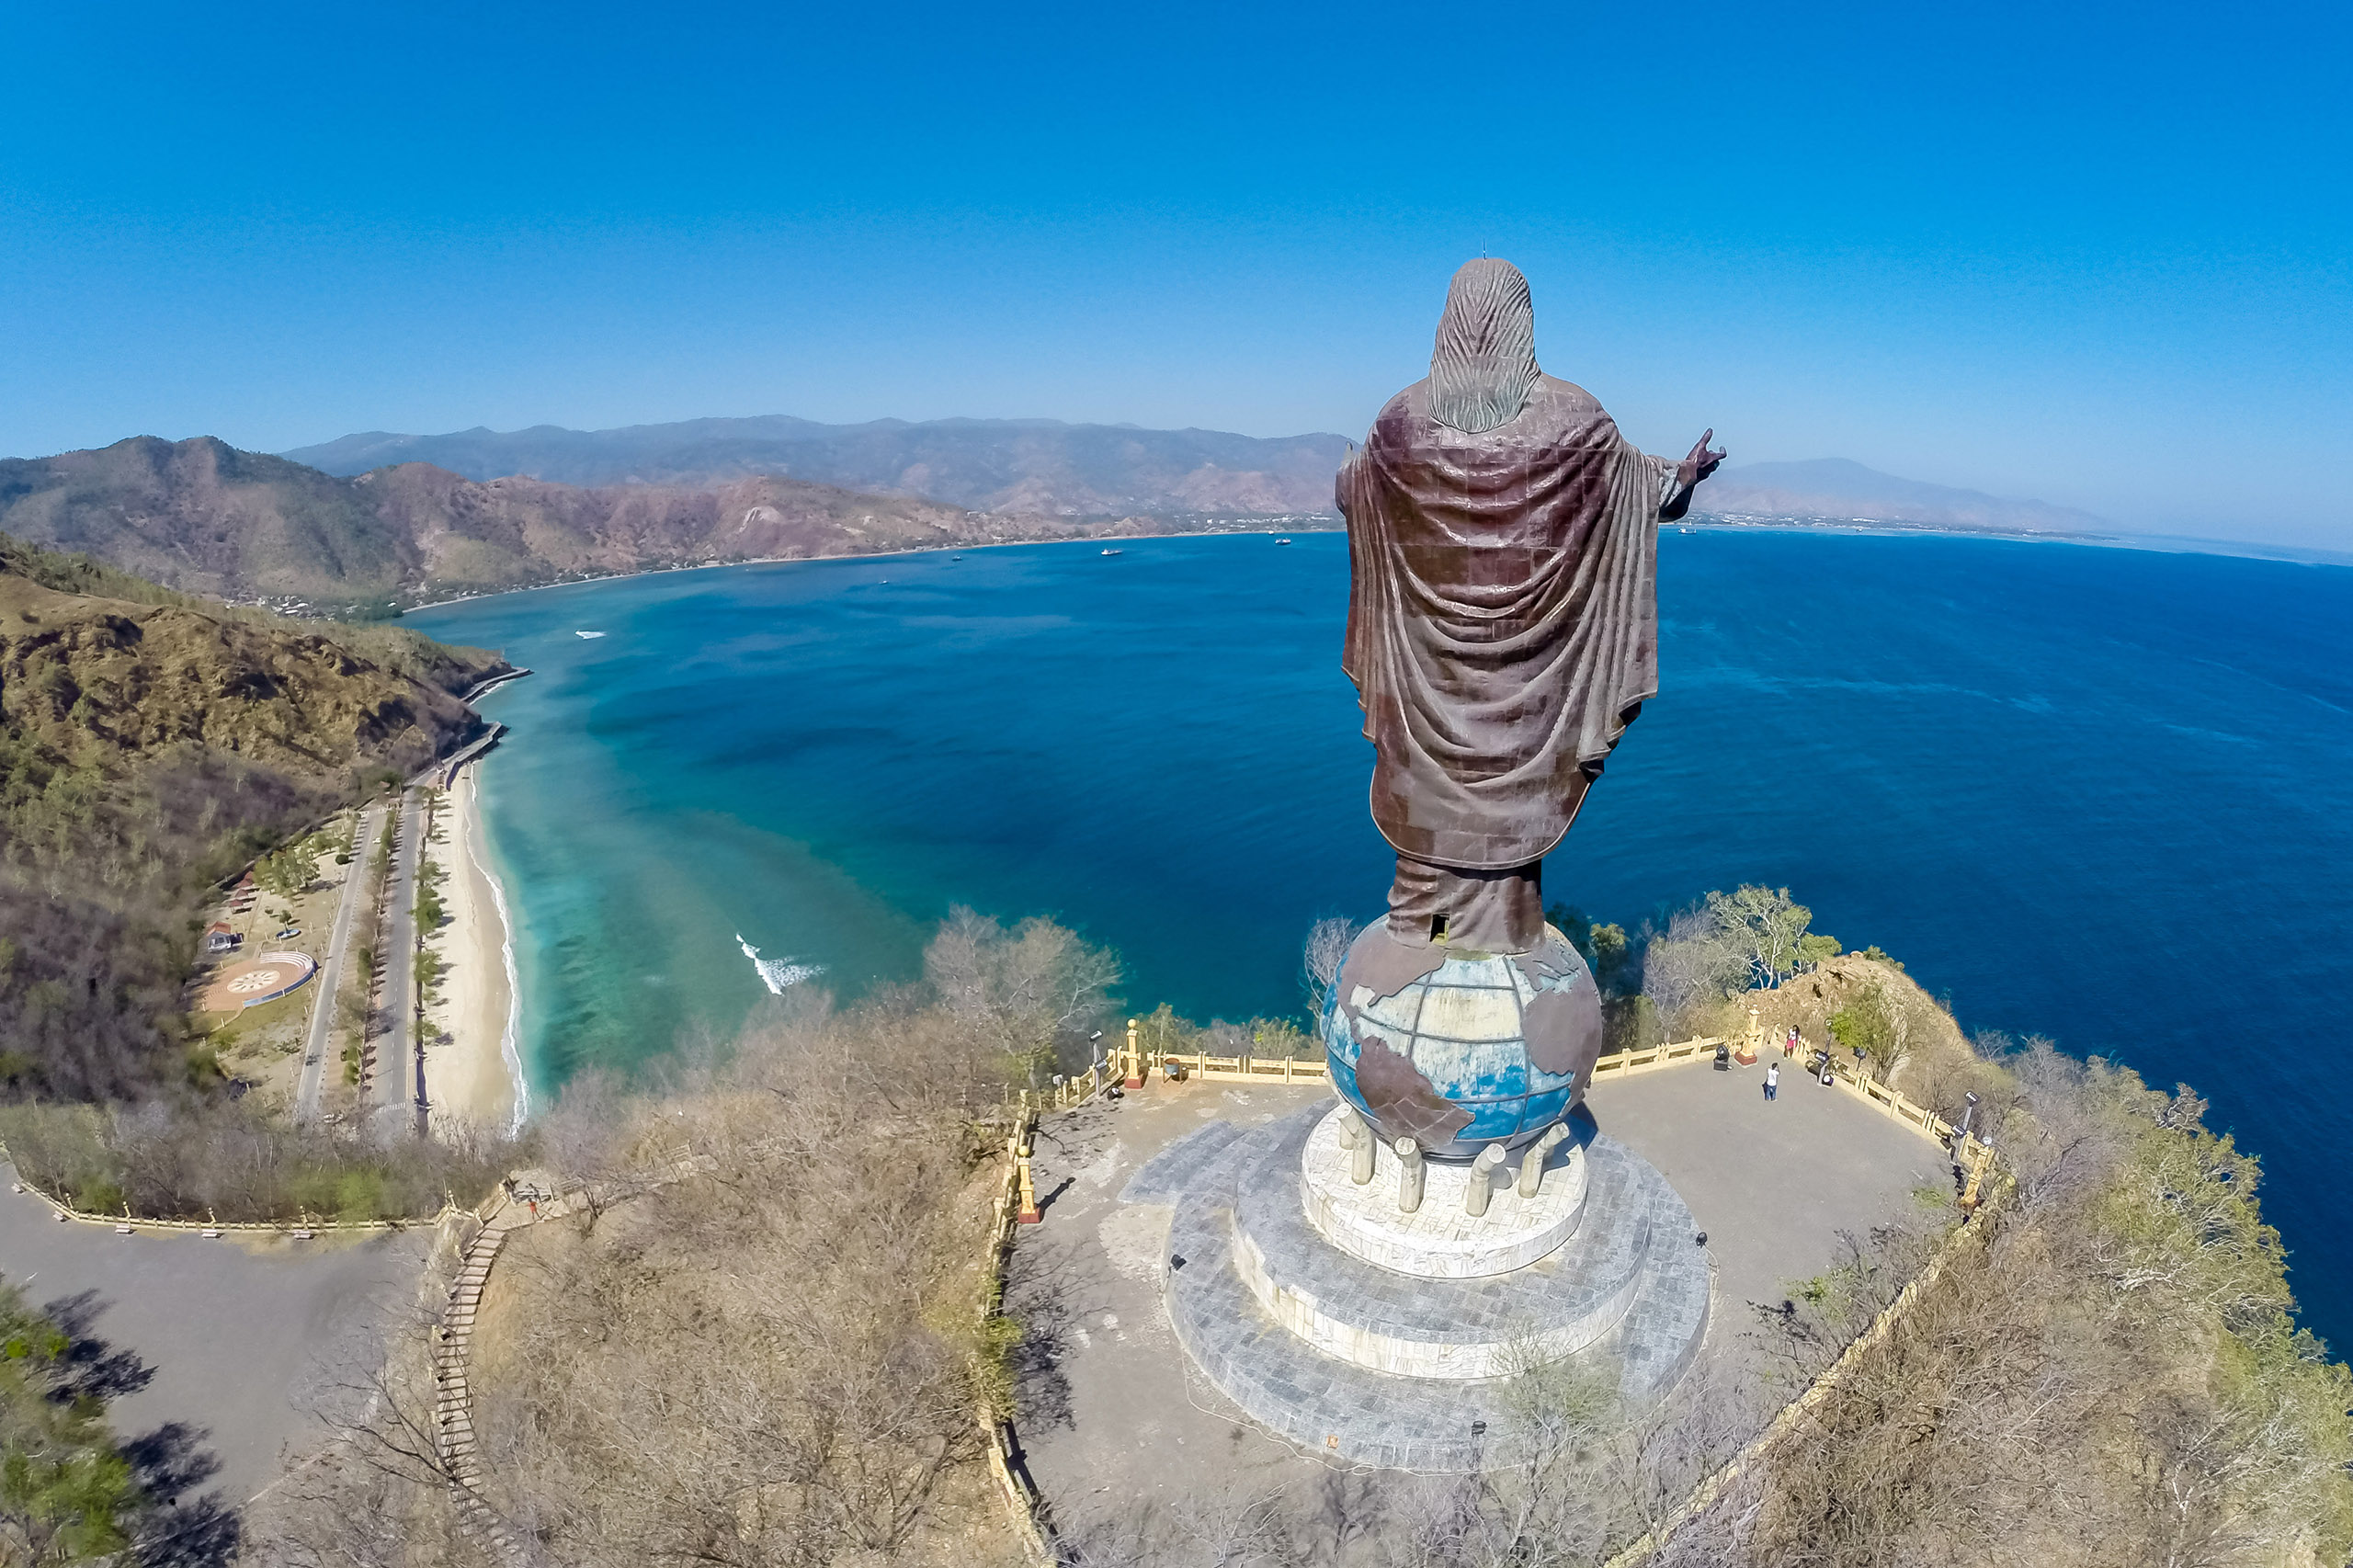 Dili, Timor-Leste - Aug 13, 2015: Aerial view of Cristo Rei of Dili, high statue of Jesus Christ located atop a globe in Dili city, East Timor, on a summit, overlooking the capital of Timor-Leste.